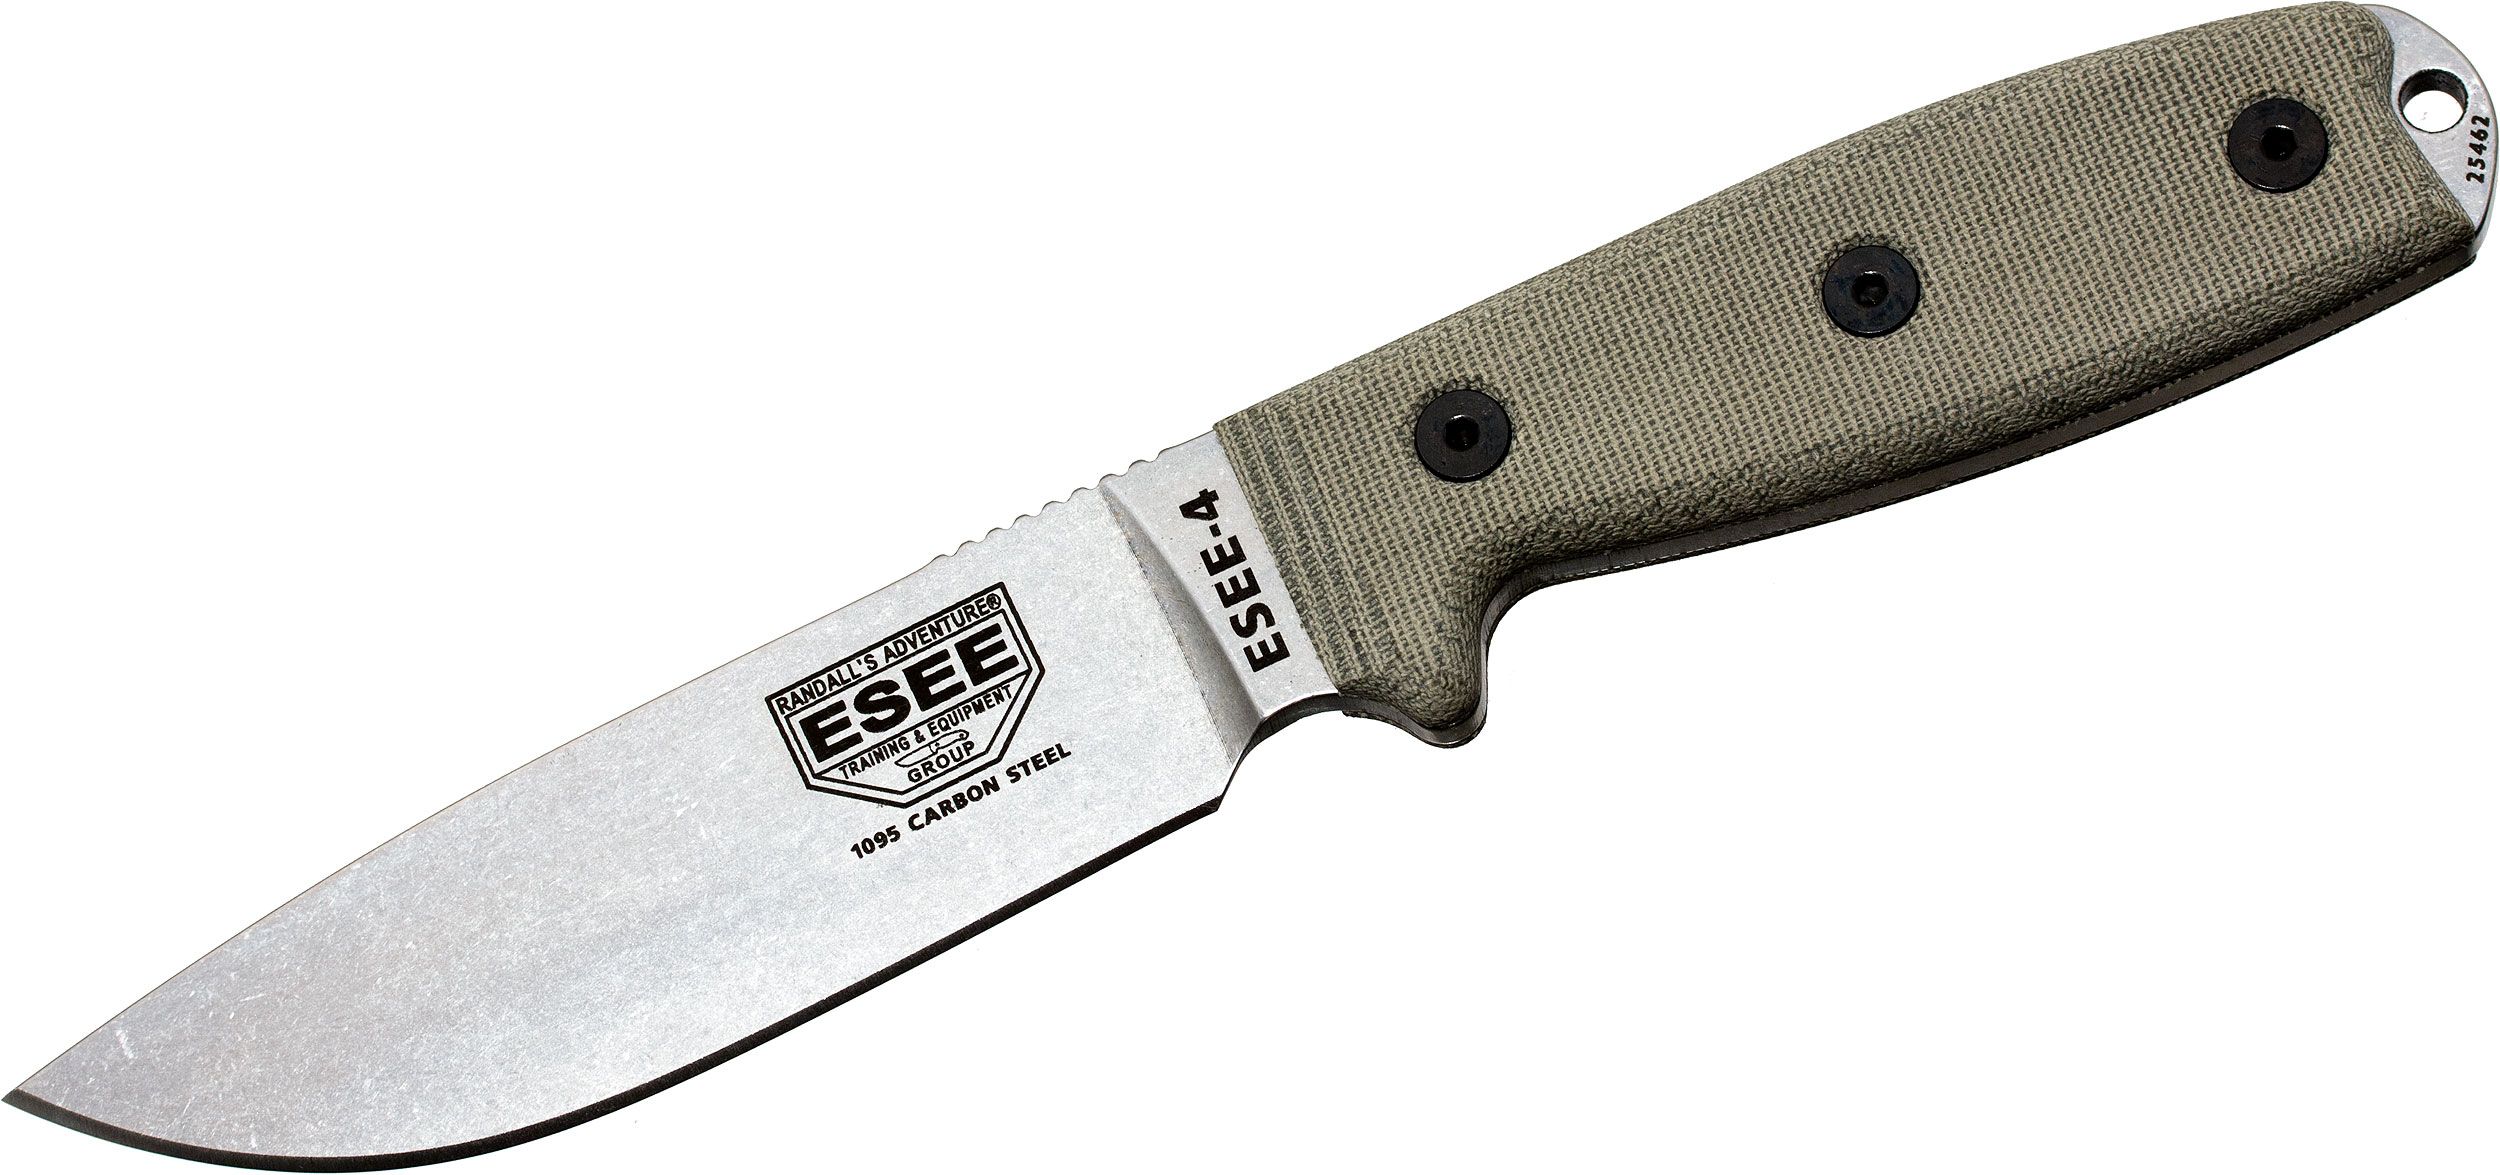 Esee Knives Esee 4p Uc Mb Uncoated Plain Edge Coyote Brown Sheath Molle Back And Clip Plate Knifecenter Discontinued